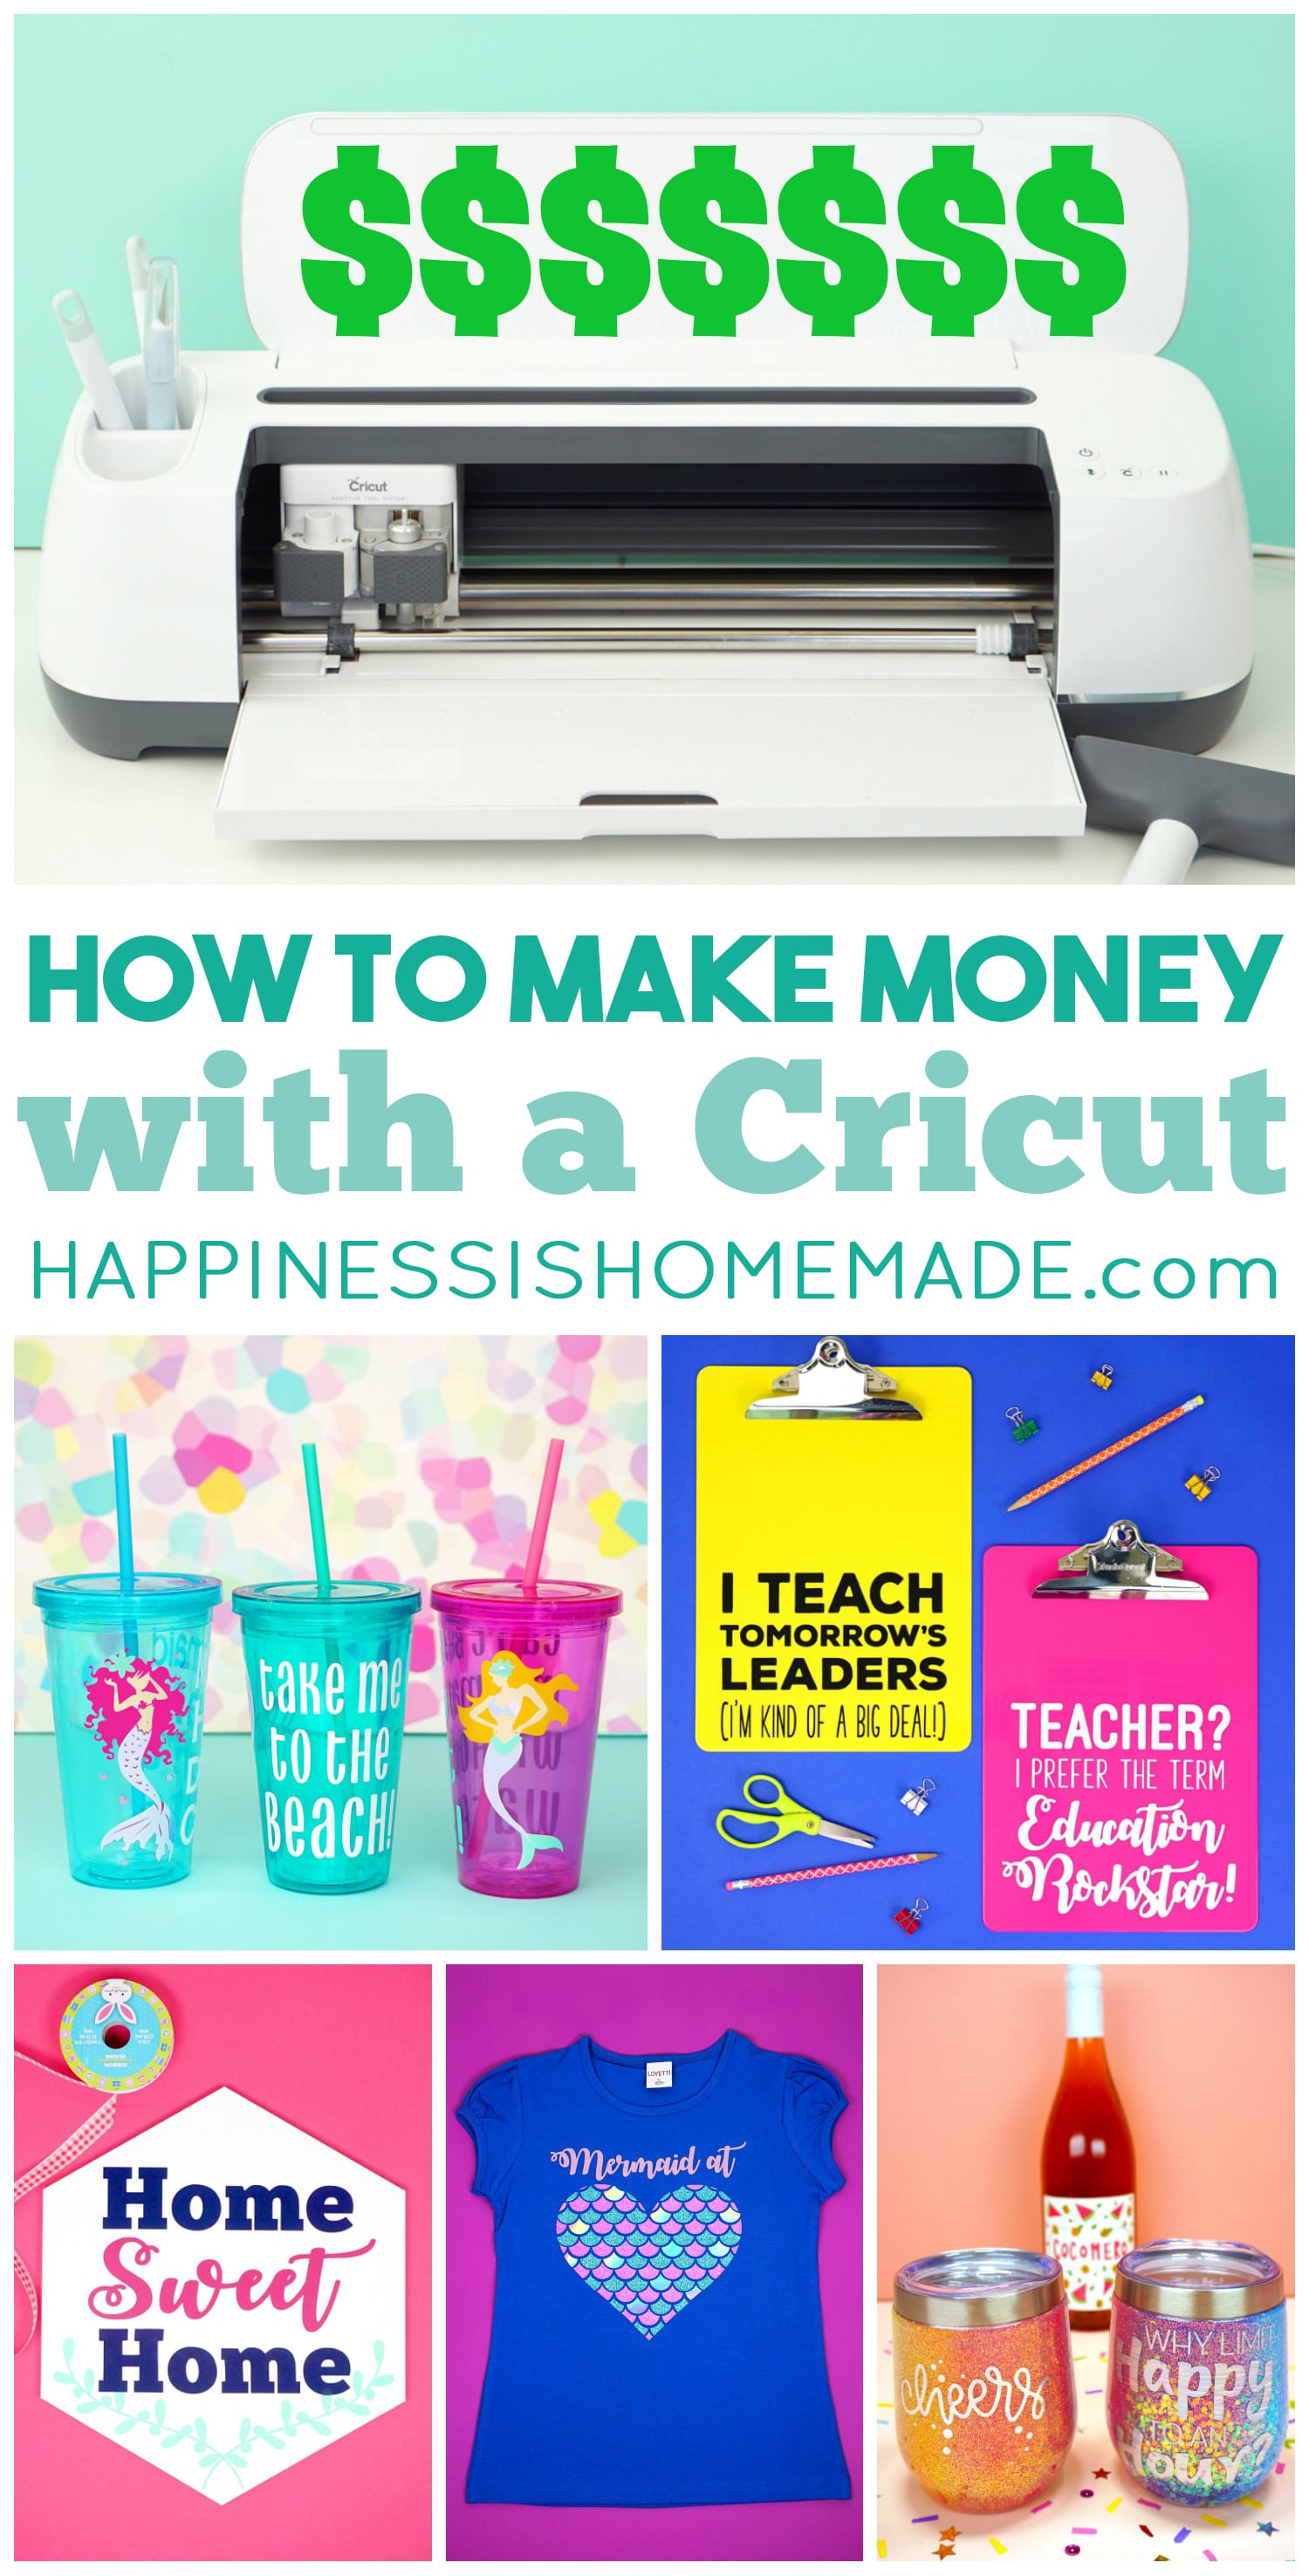 What is the Cricut Maker? And What Can You Do With It?